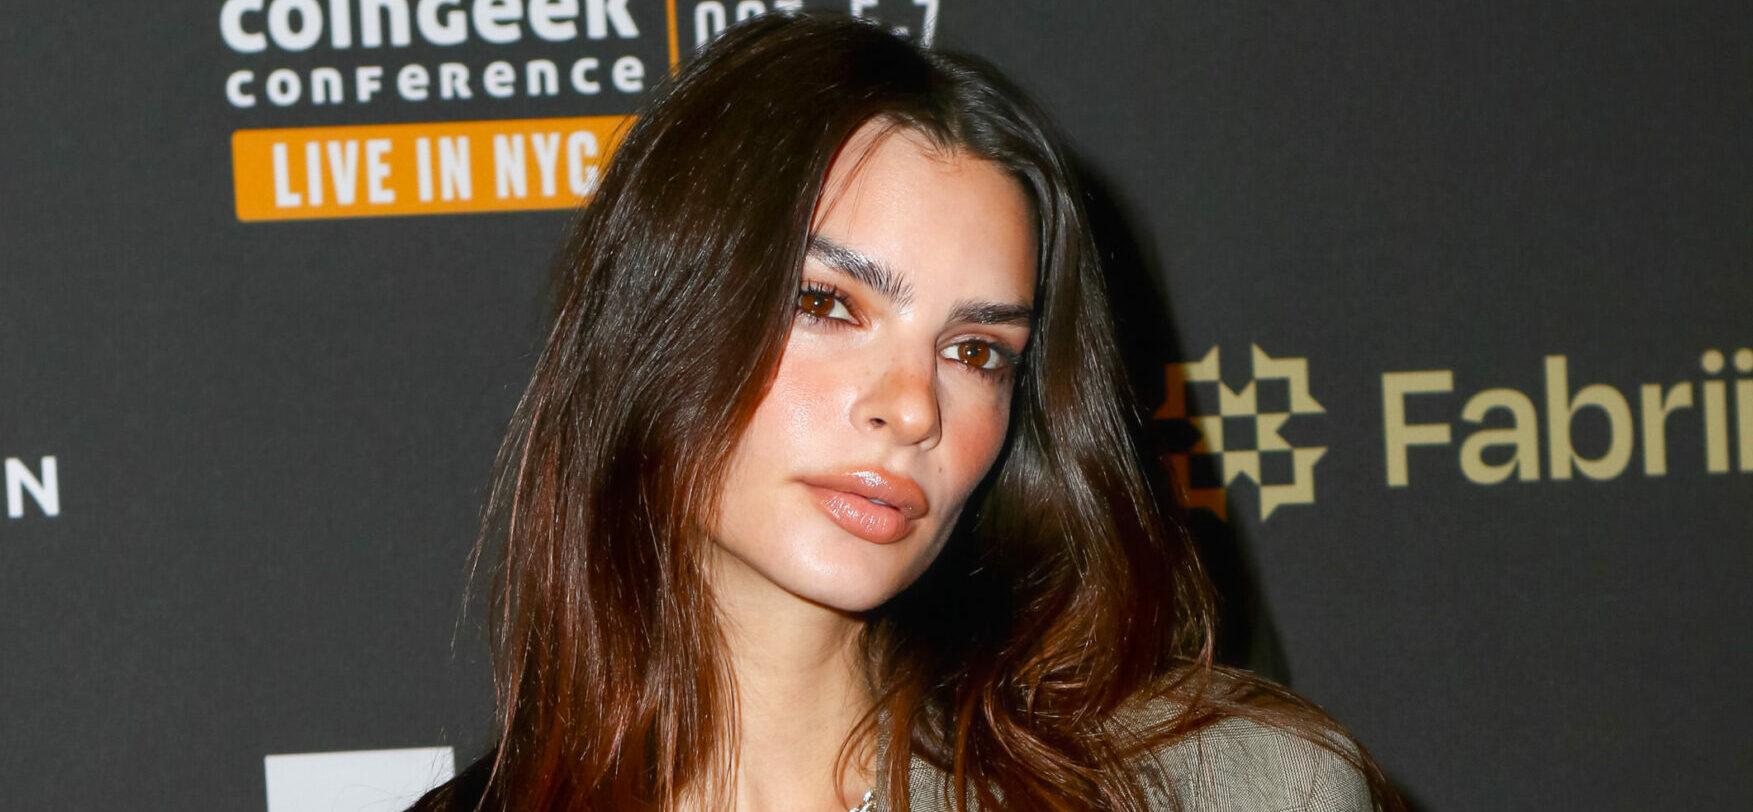 Emily Ratajkowski Talks About ‘Real Empowerment’ While Throwing Shade At Her Mother